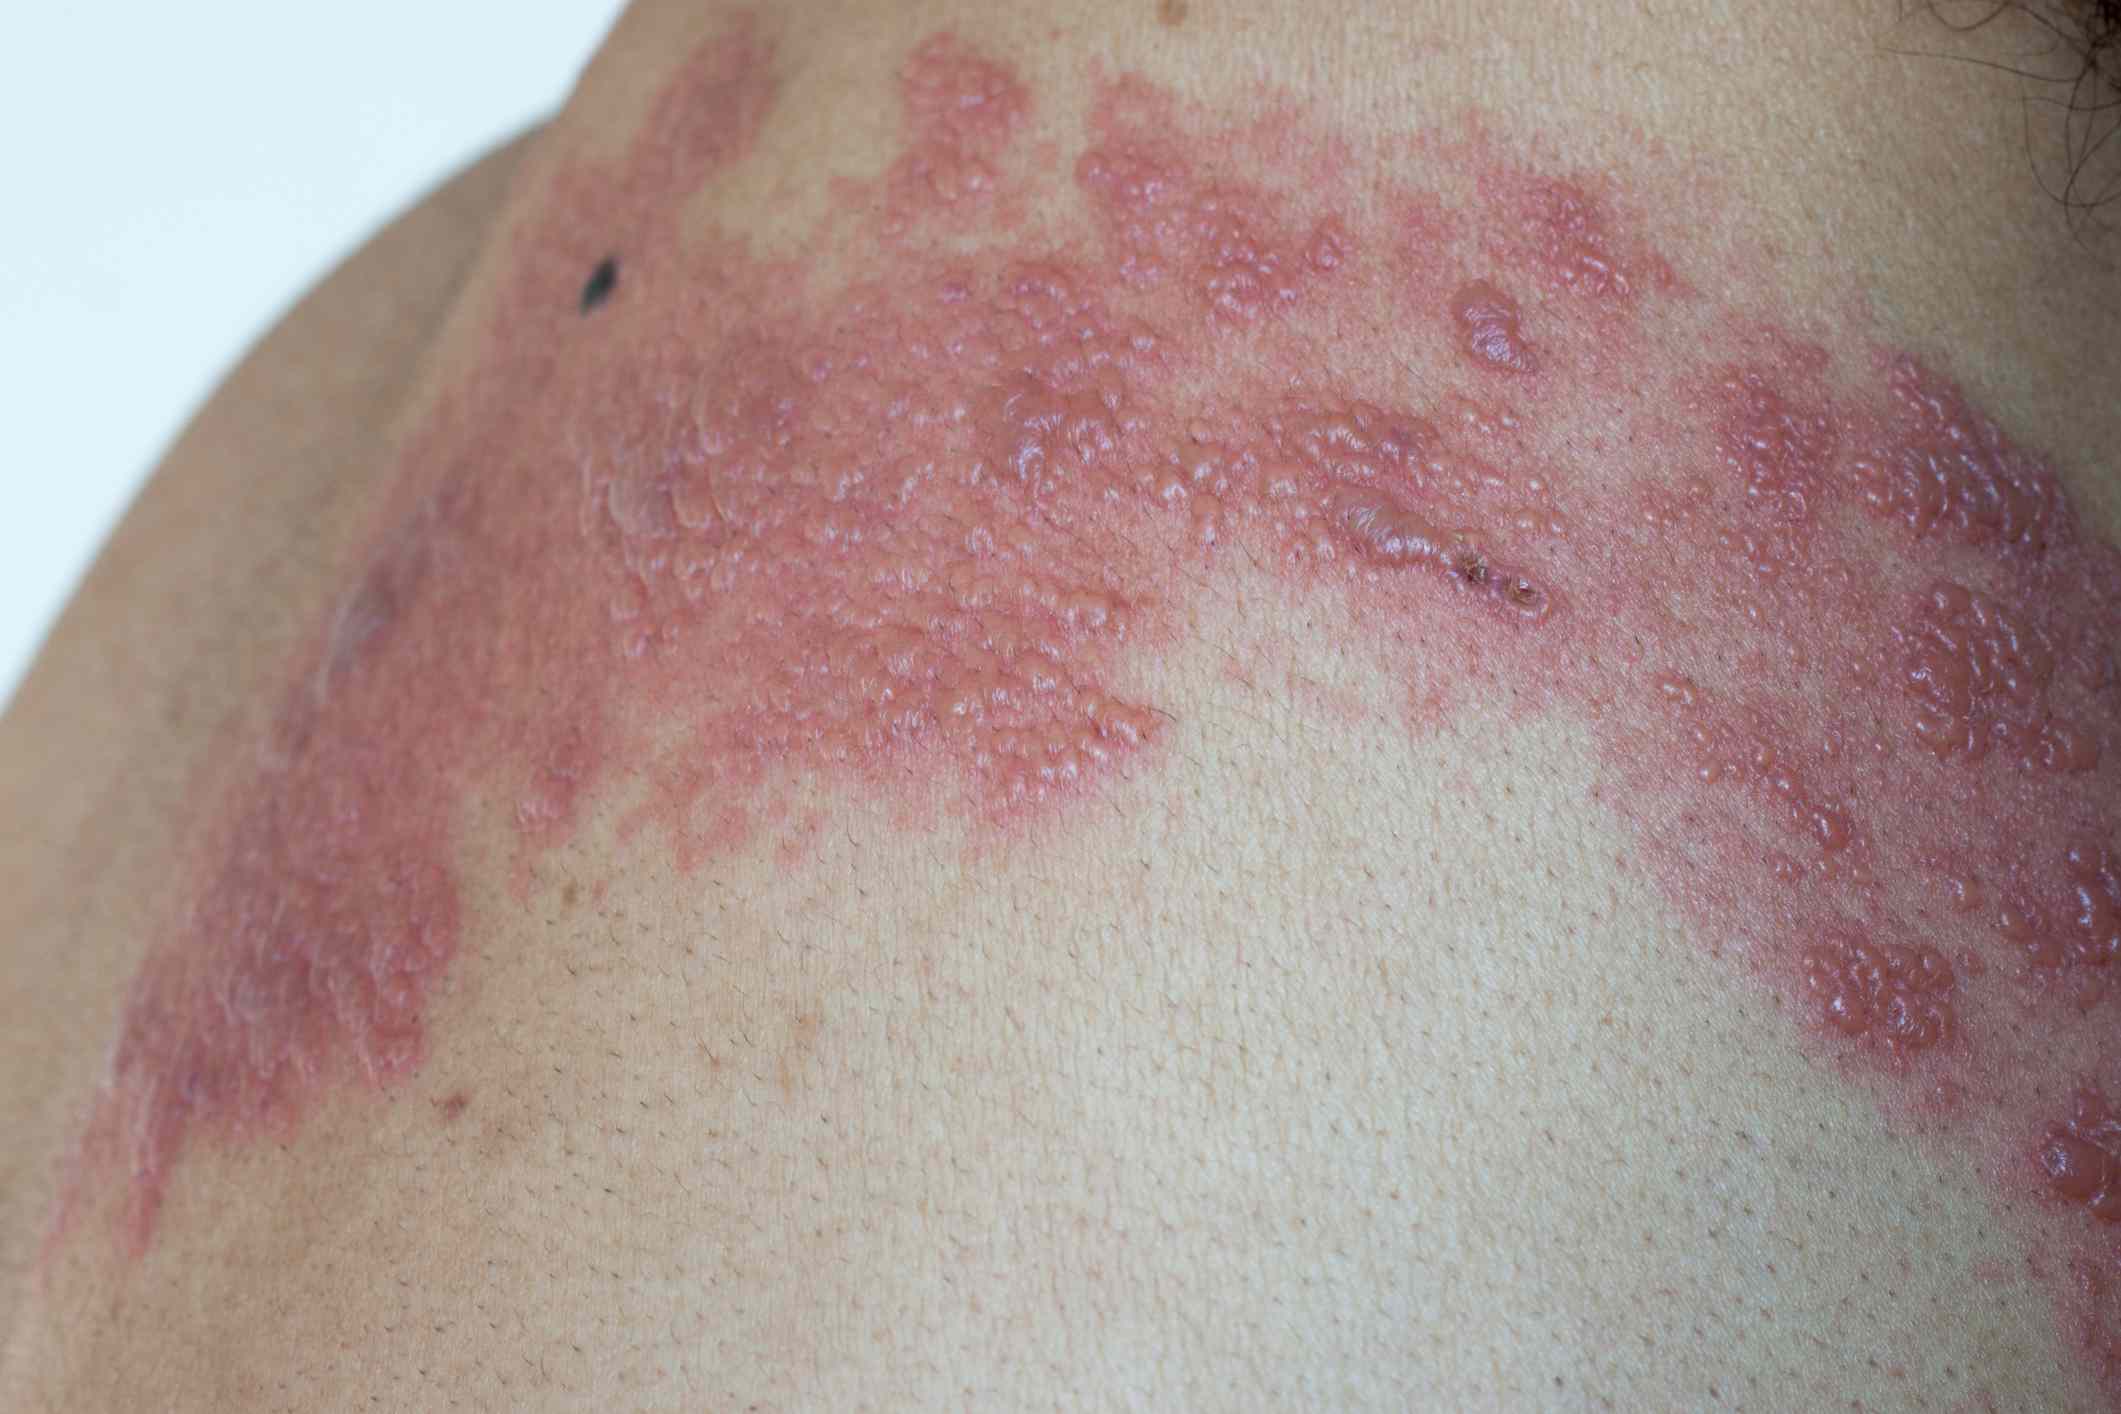 What Does Shingles Look Like Shingles Rash Pictures